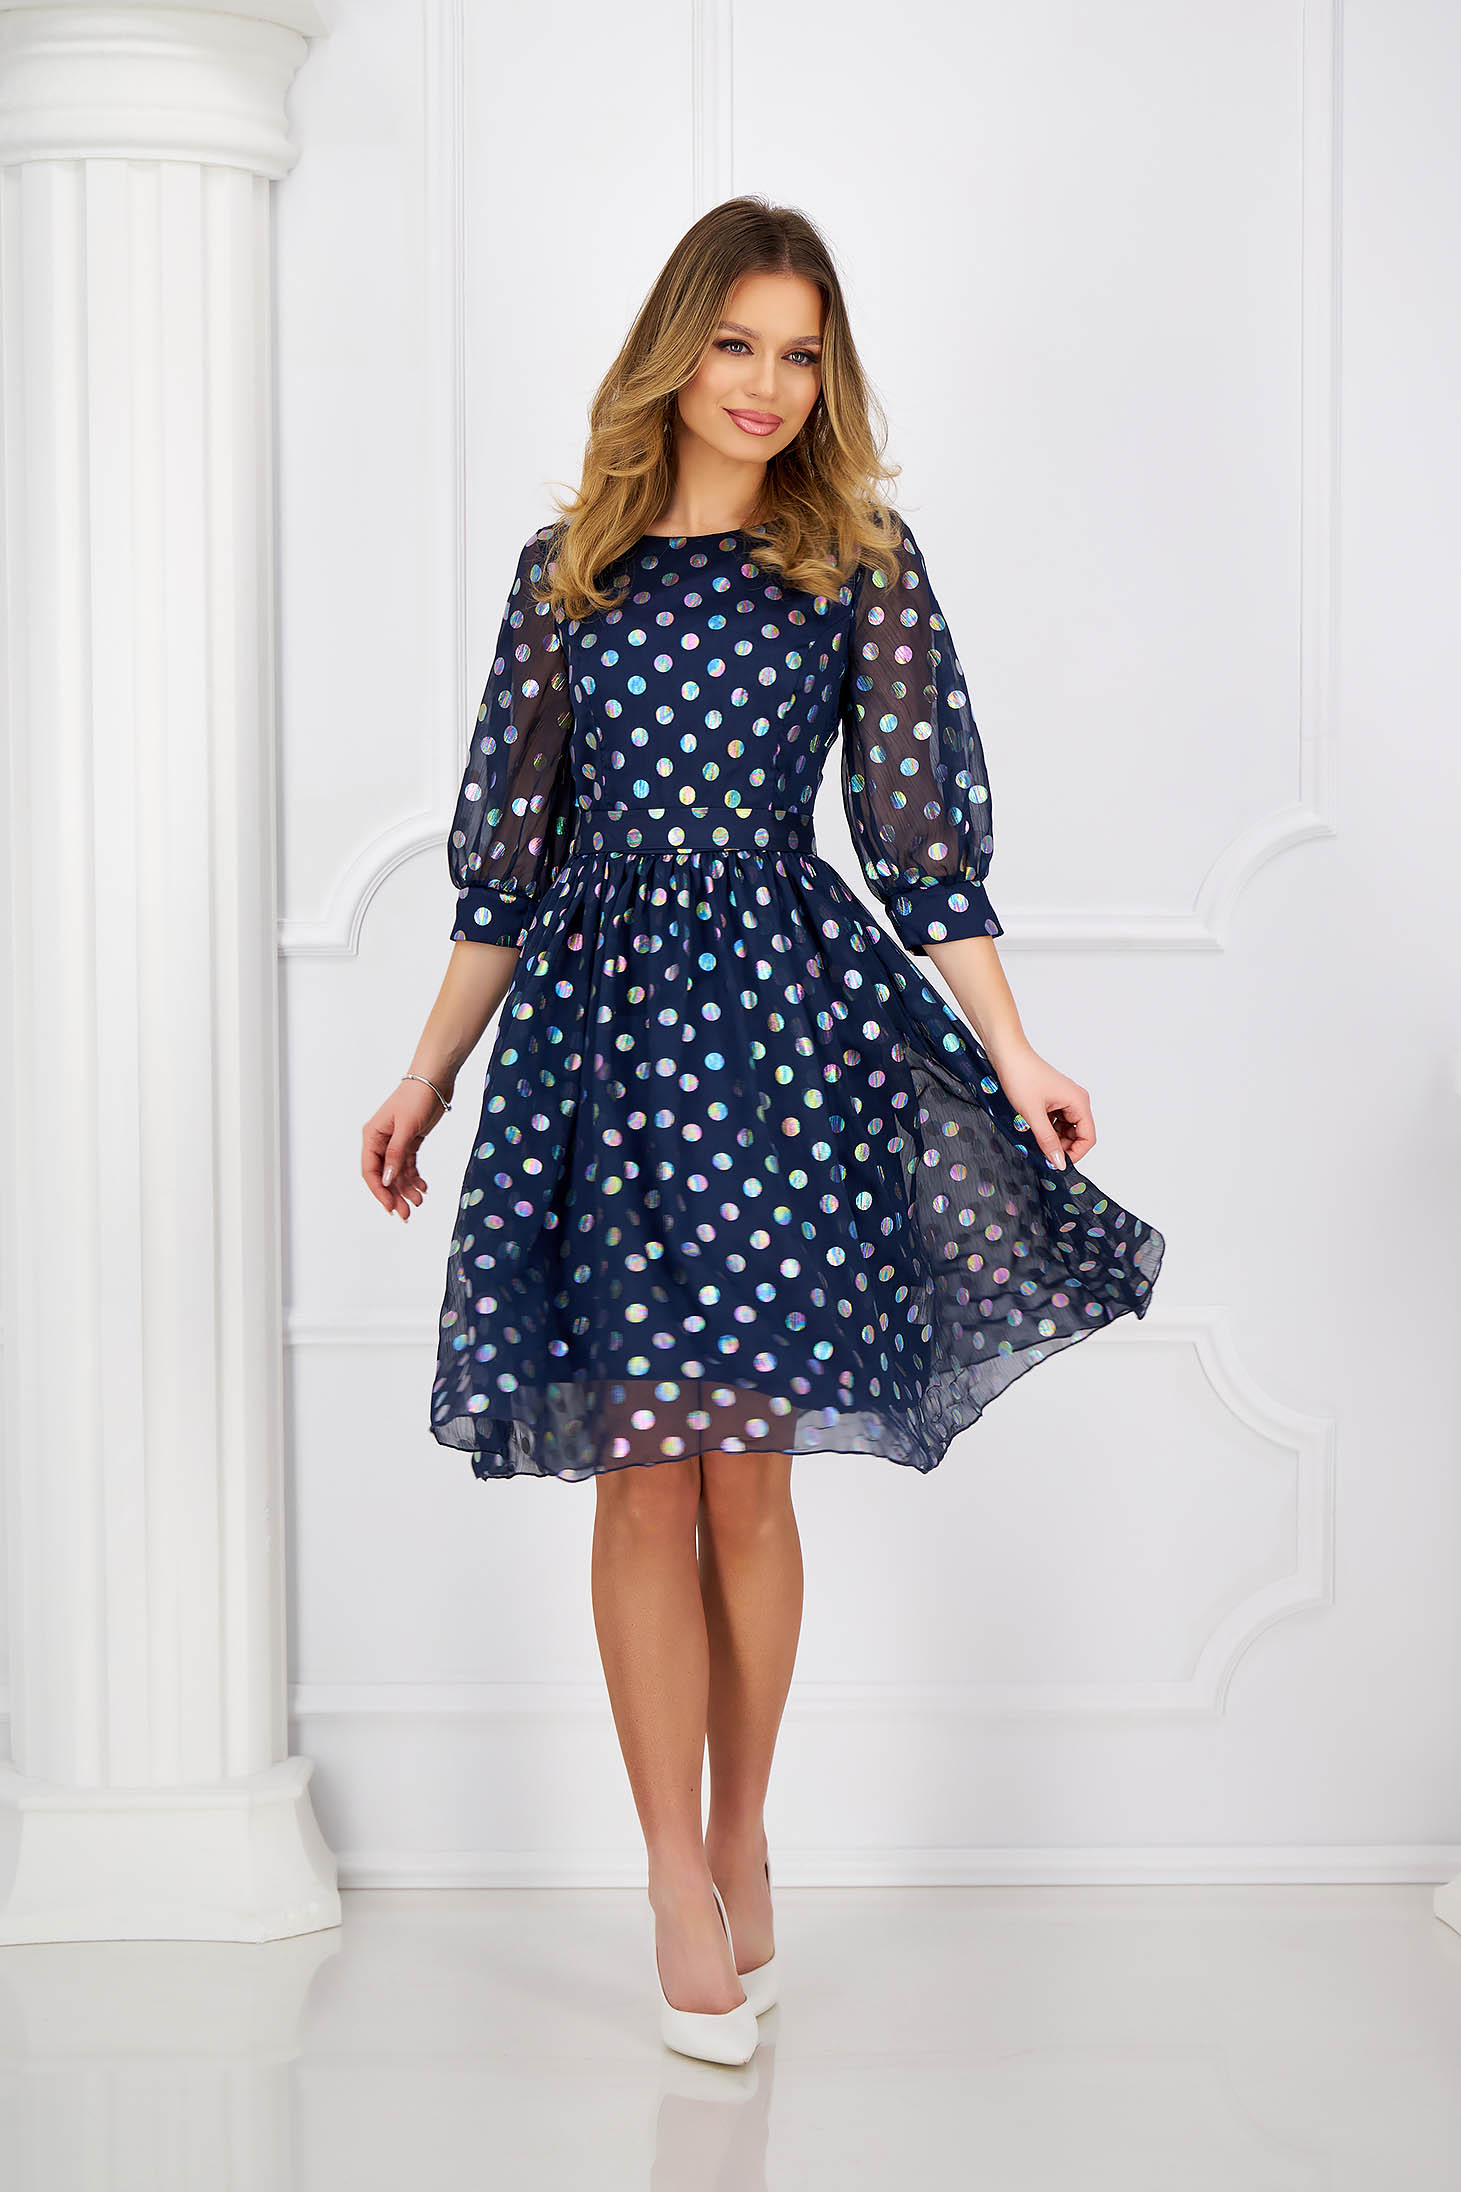 Veil dress in A-line with polka dots accessorized with belt and bow - StarShinerS 1 - StarShinerS.com